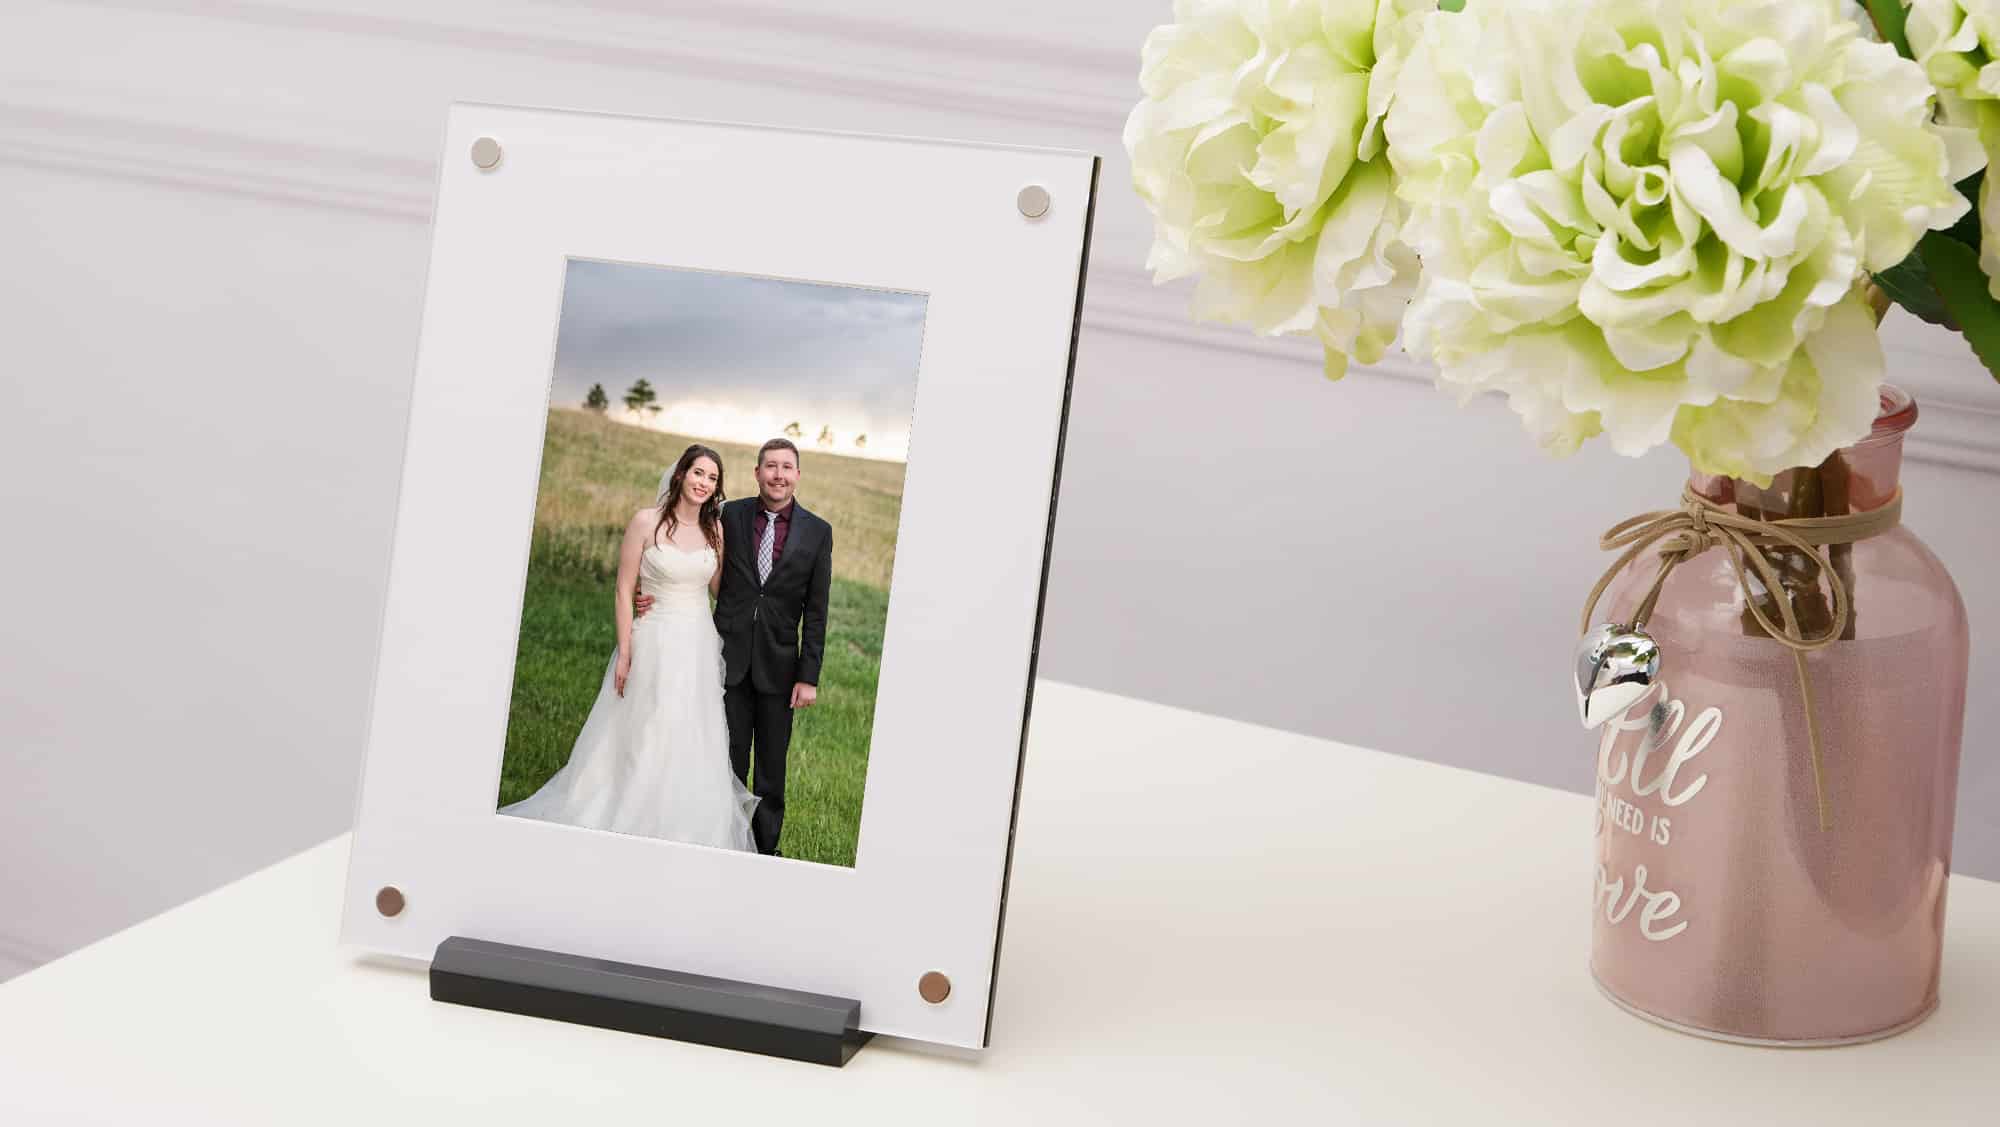 A folio style art frame that uses magnets and stands in a holder on a desk with flowers.